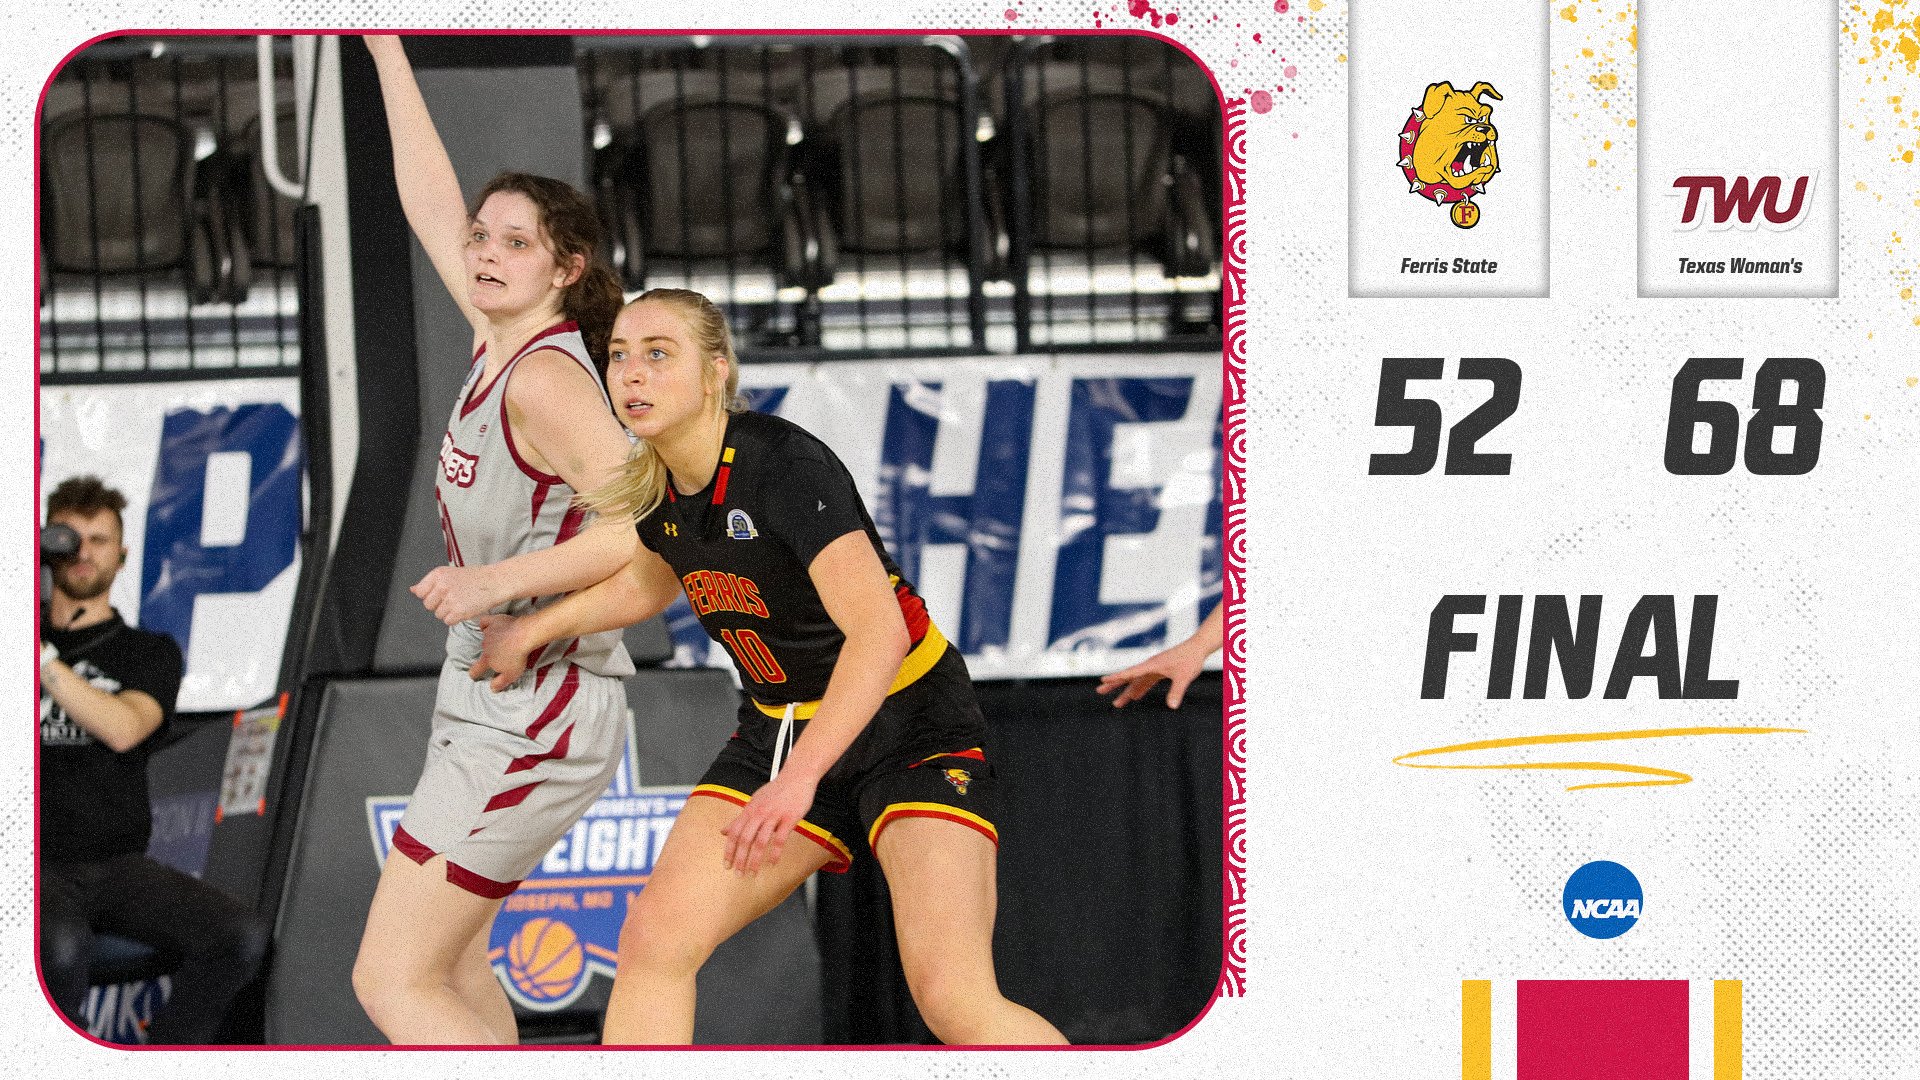 Ferris State's Historic Campaign Comes To End In NCAA D2 National Semifinals